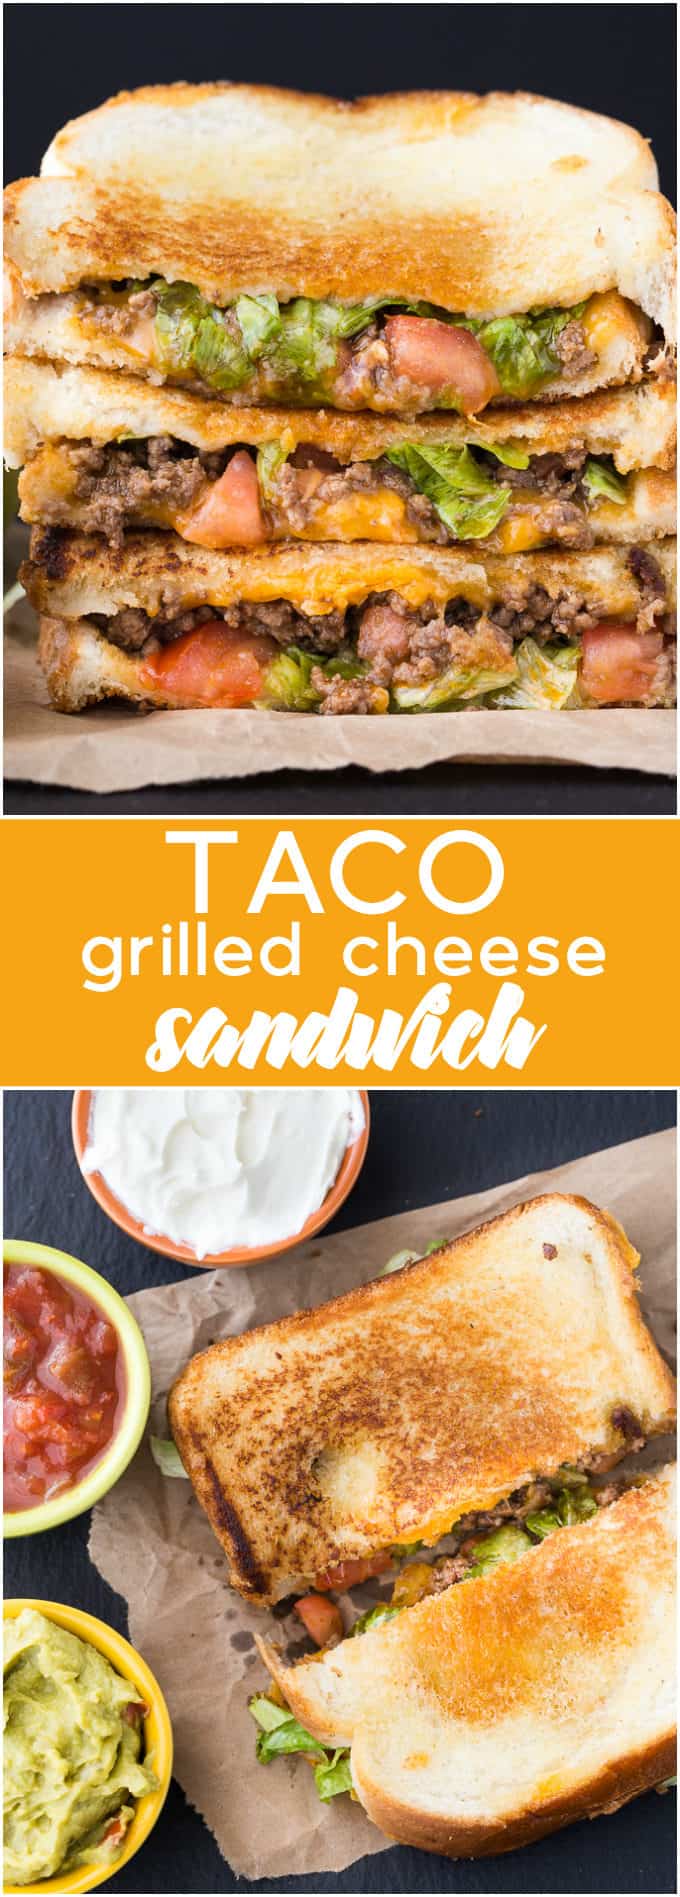 Taco Grilled Cheese Sandwich - Spice up your soup night! This crunchy sandwich is stuffed with seasoned ground beef, lettuce, tomatoes, and gooey cheese for the most filling grilled cheese recipe.